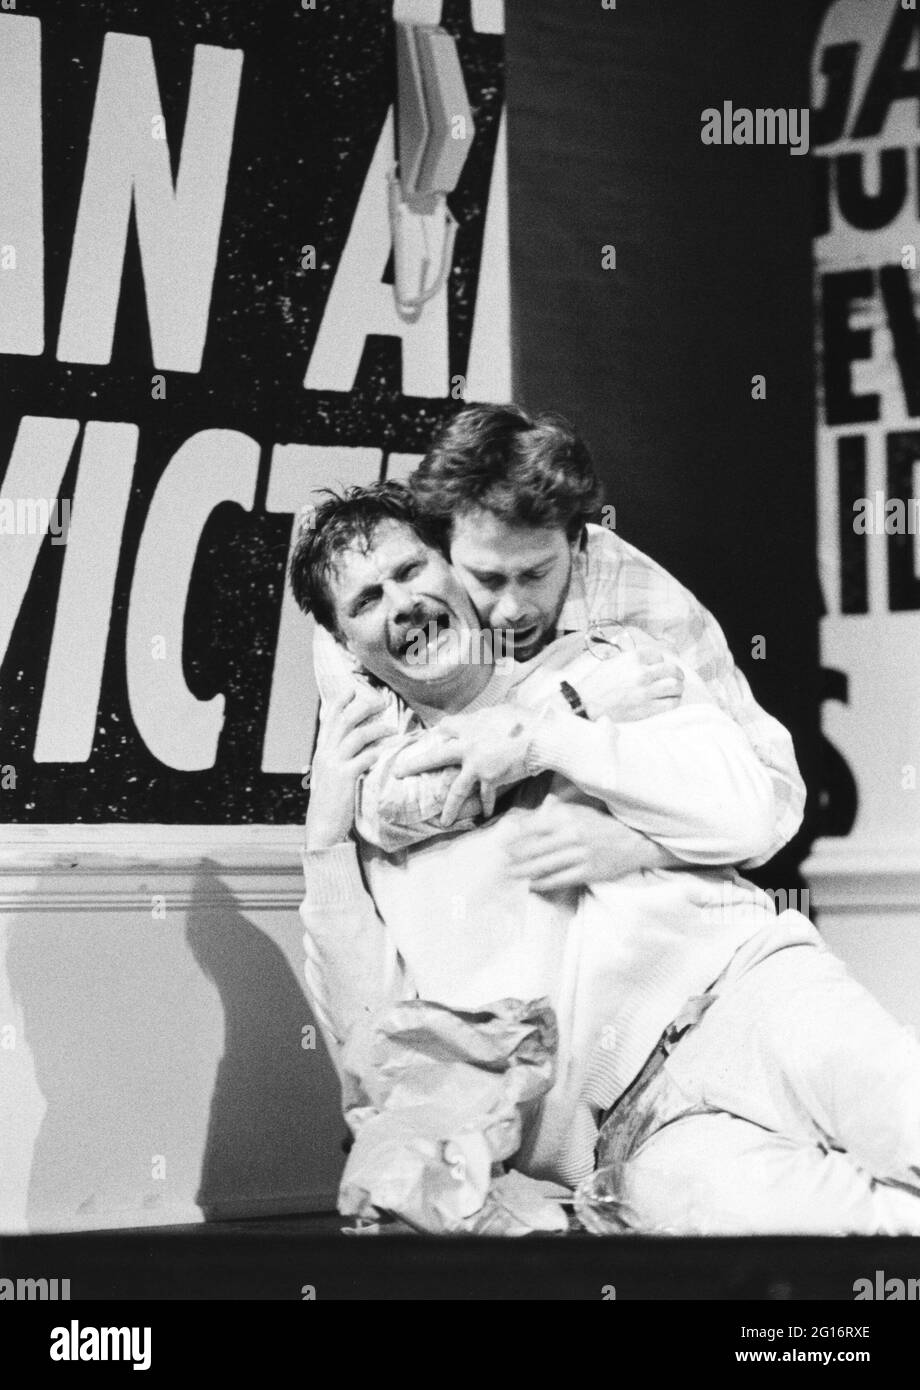 l-r: Paul Jesson (Felix Turner), Tom Hulce (Ned Weeks) in THE NORMAL HEART by Larry Kramer at the Albery Theatre, London WC2  20/05/1986  a Royal Court Theatre production  design: Geoff Rose  lighting: Gerry Jenkinson  director: David Hayman Stock Photo